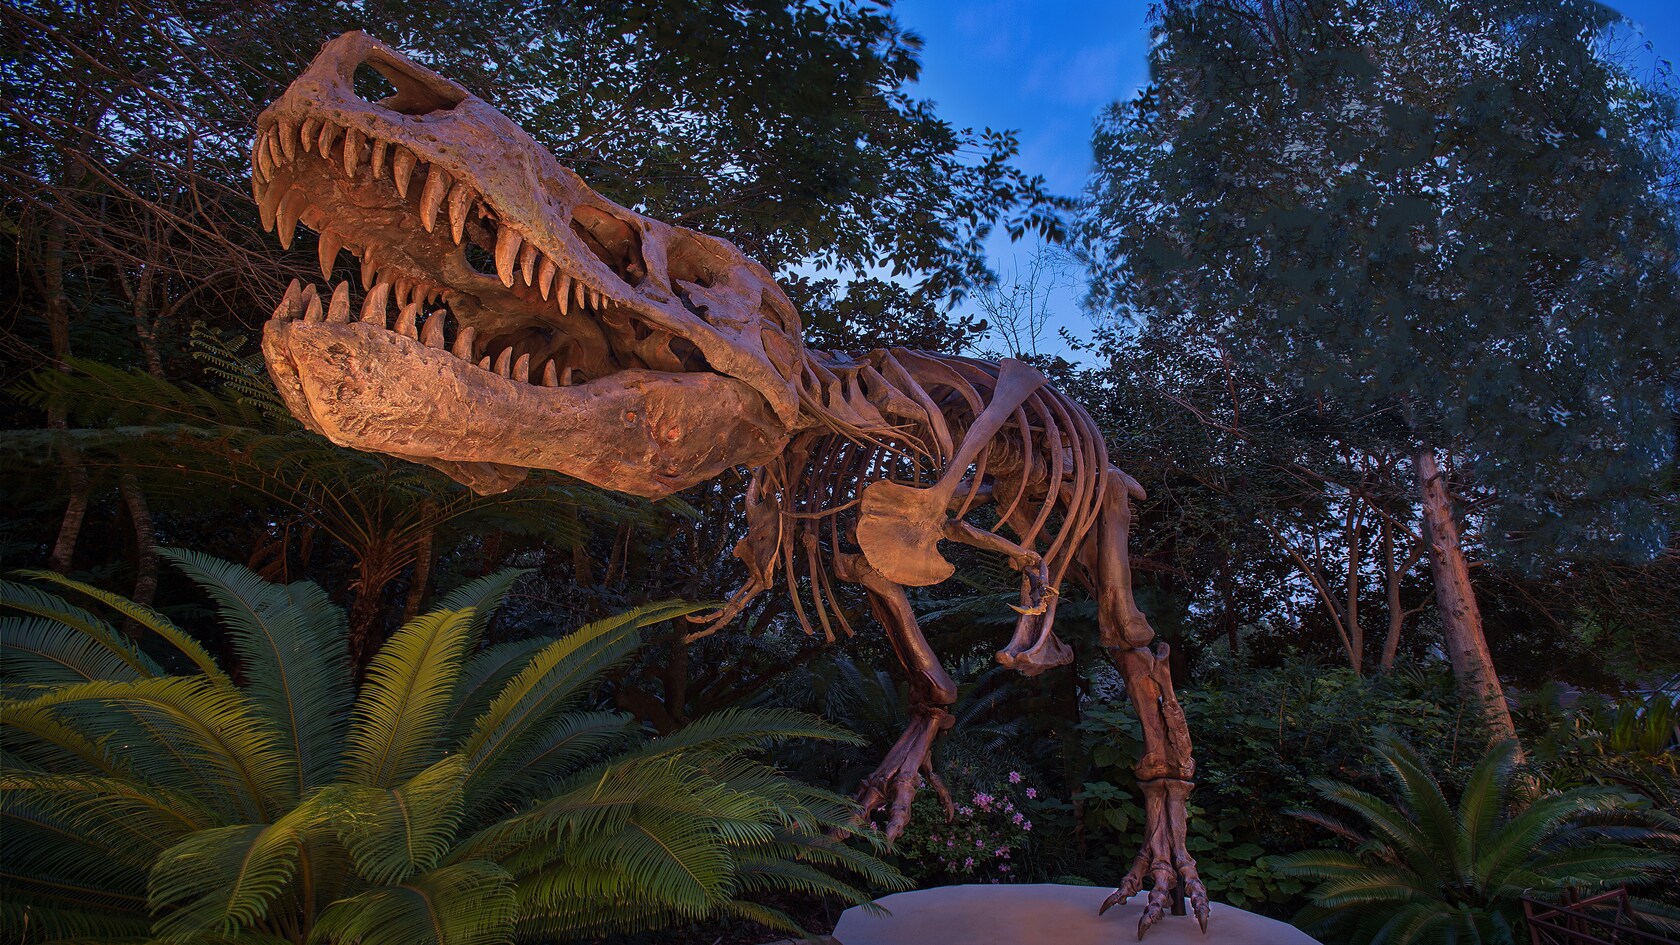 8 Totally Cool Things About Dino-Sue At Walt Disney World - Disney Dining